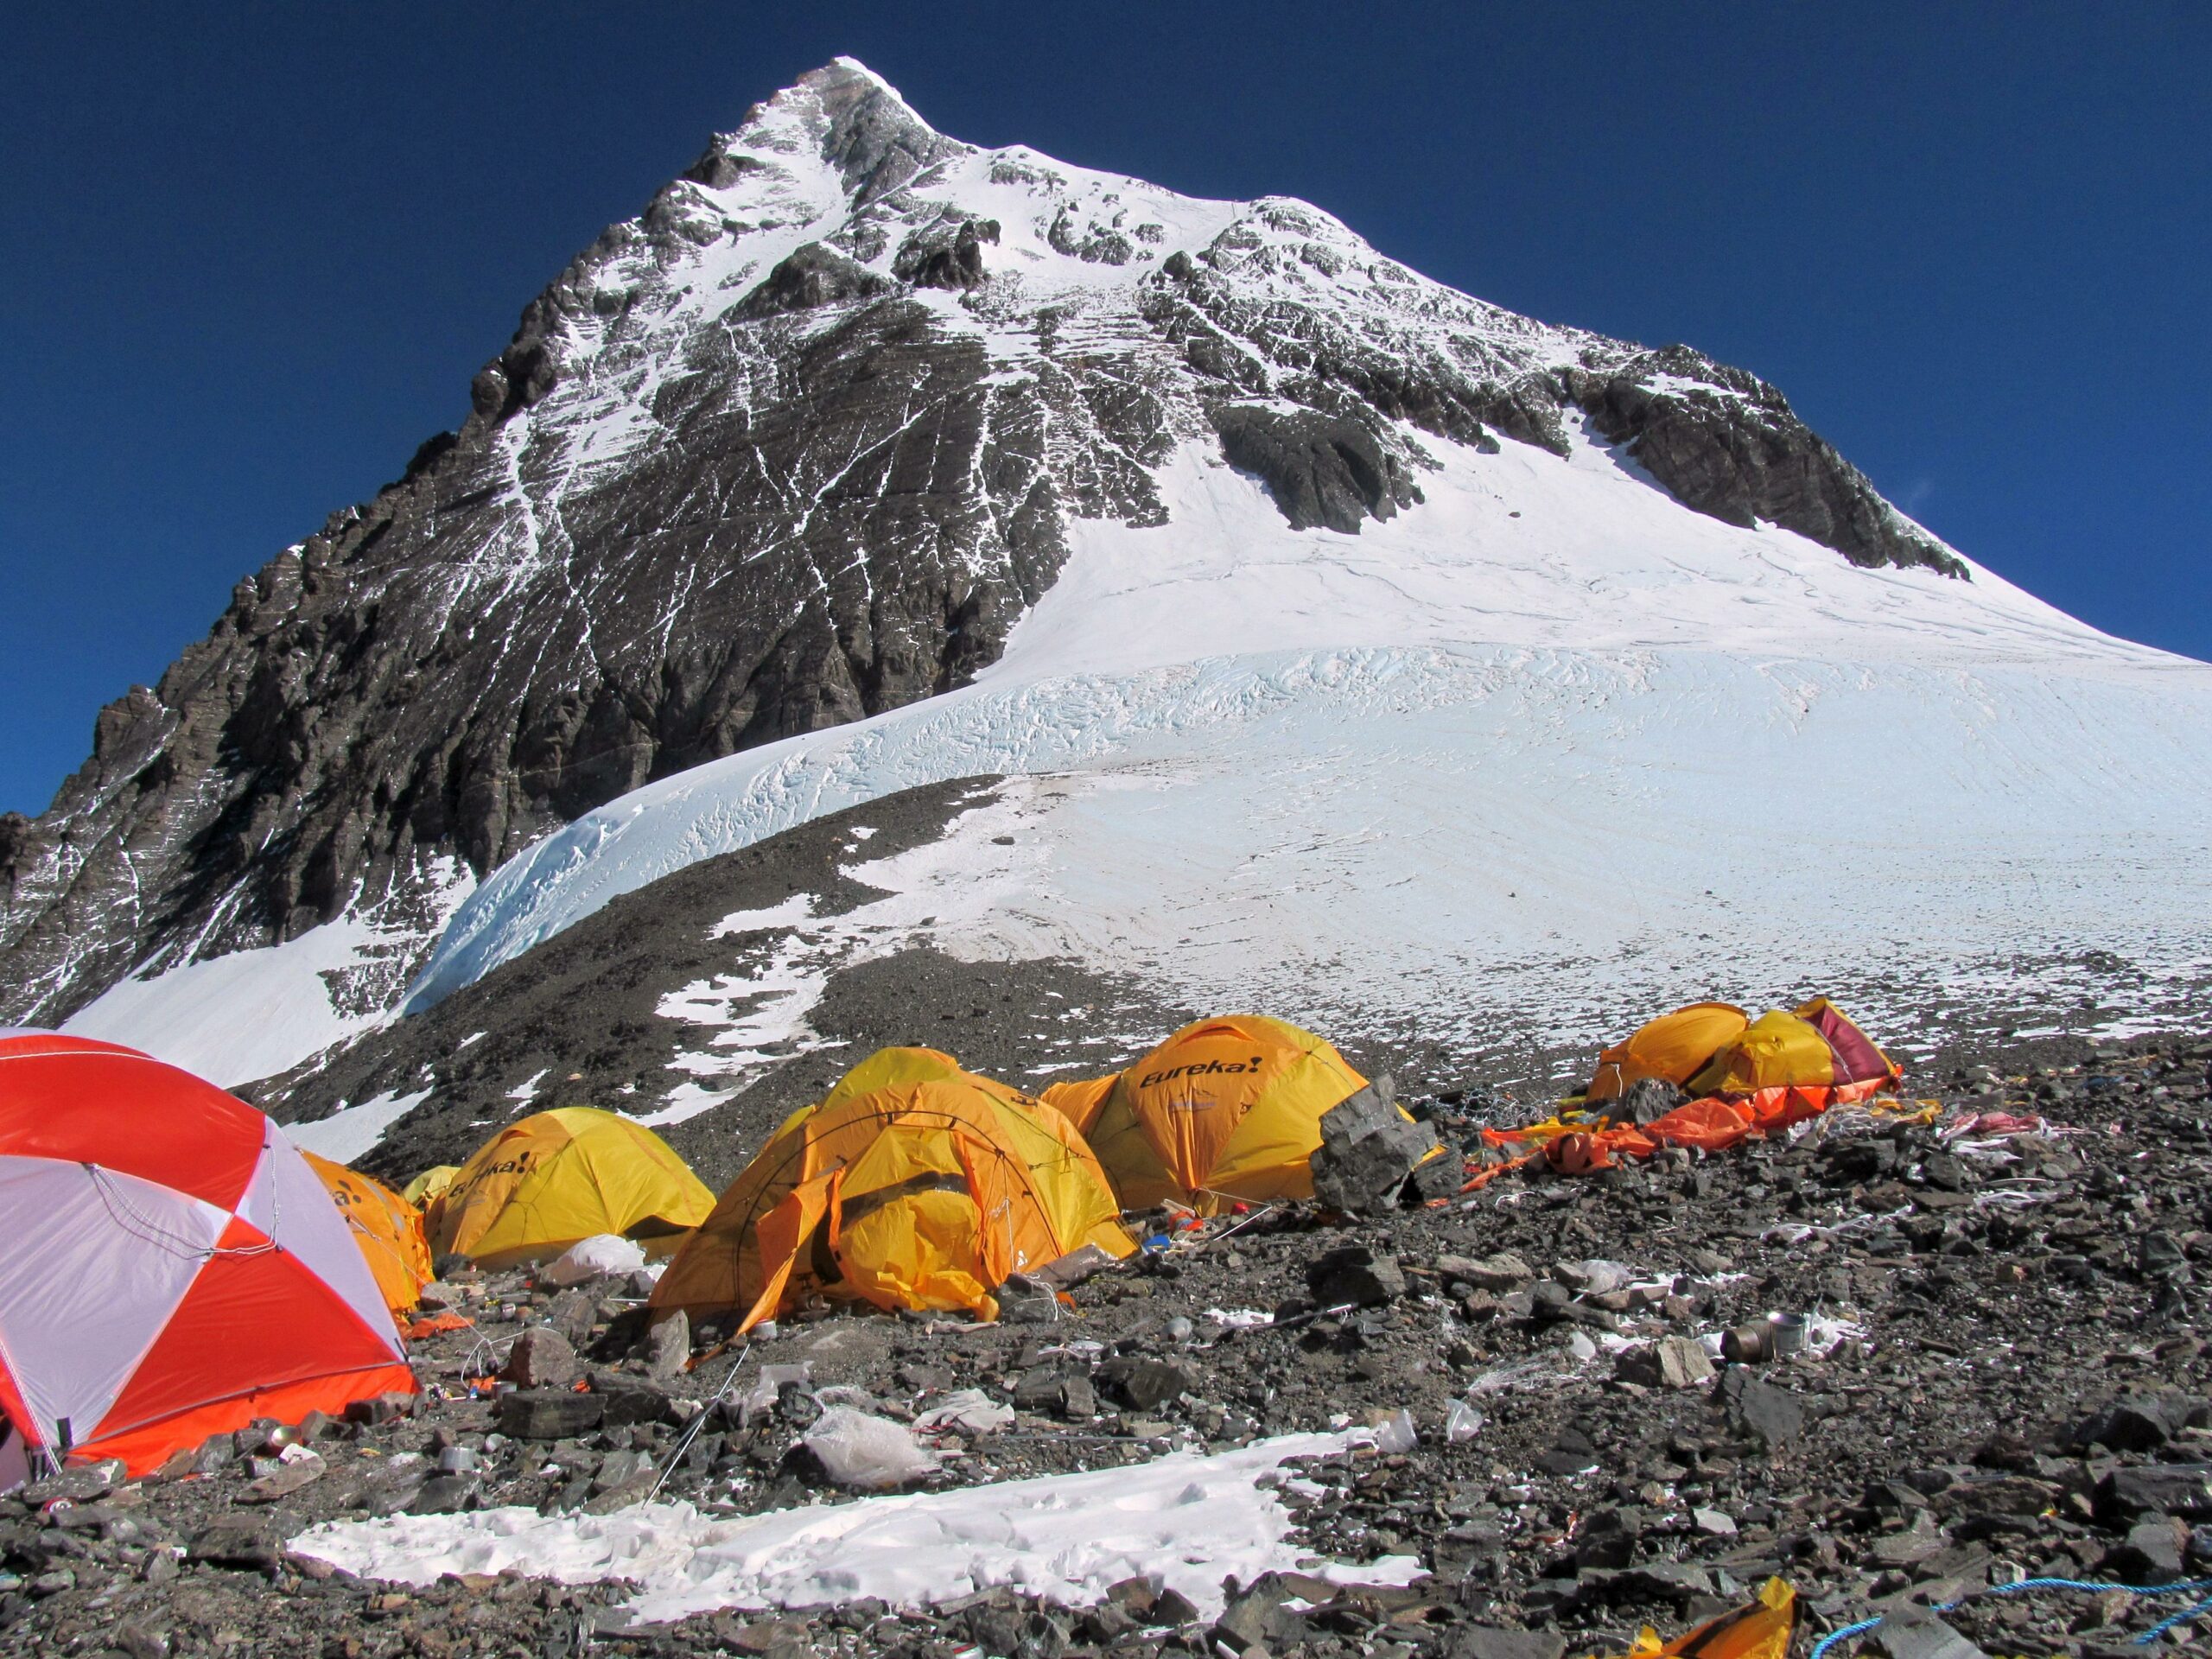 a group of tents pitched in the snow - File:Summit camp Everest.jpg